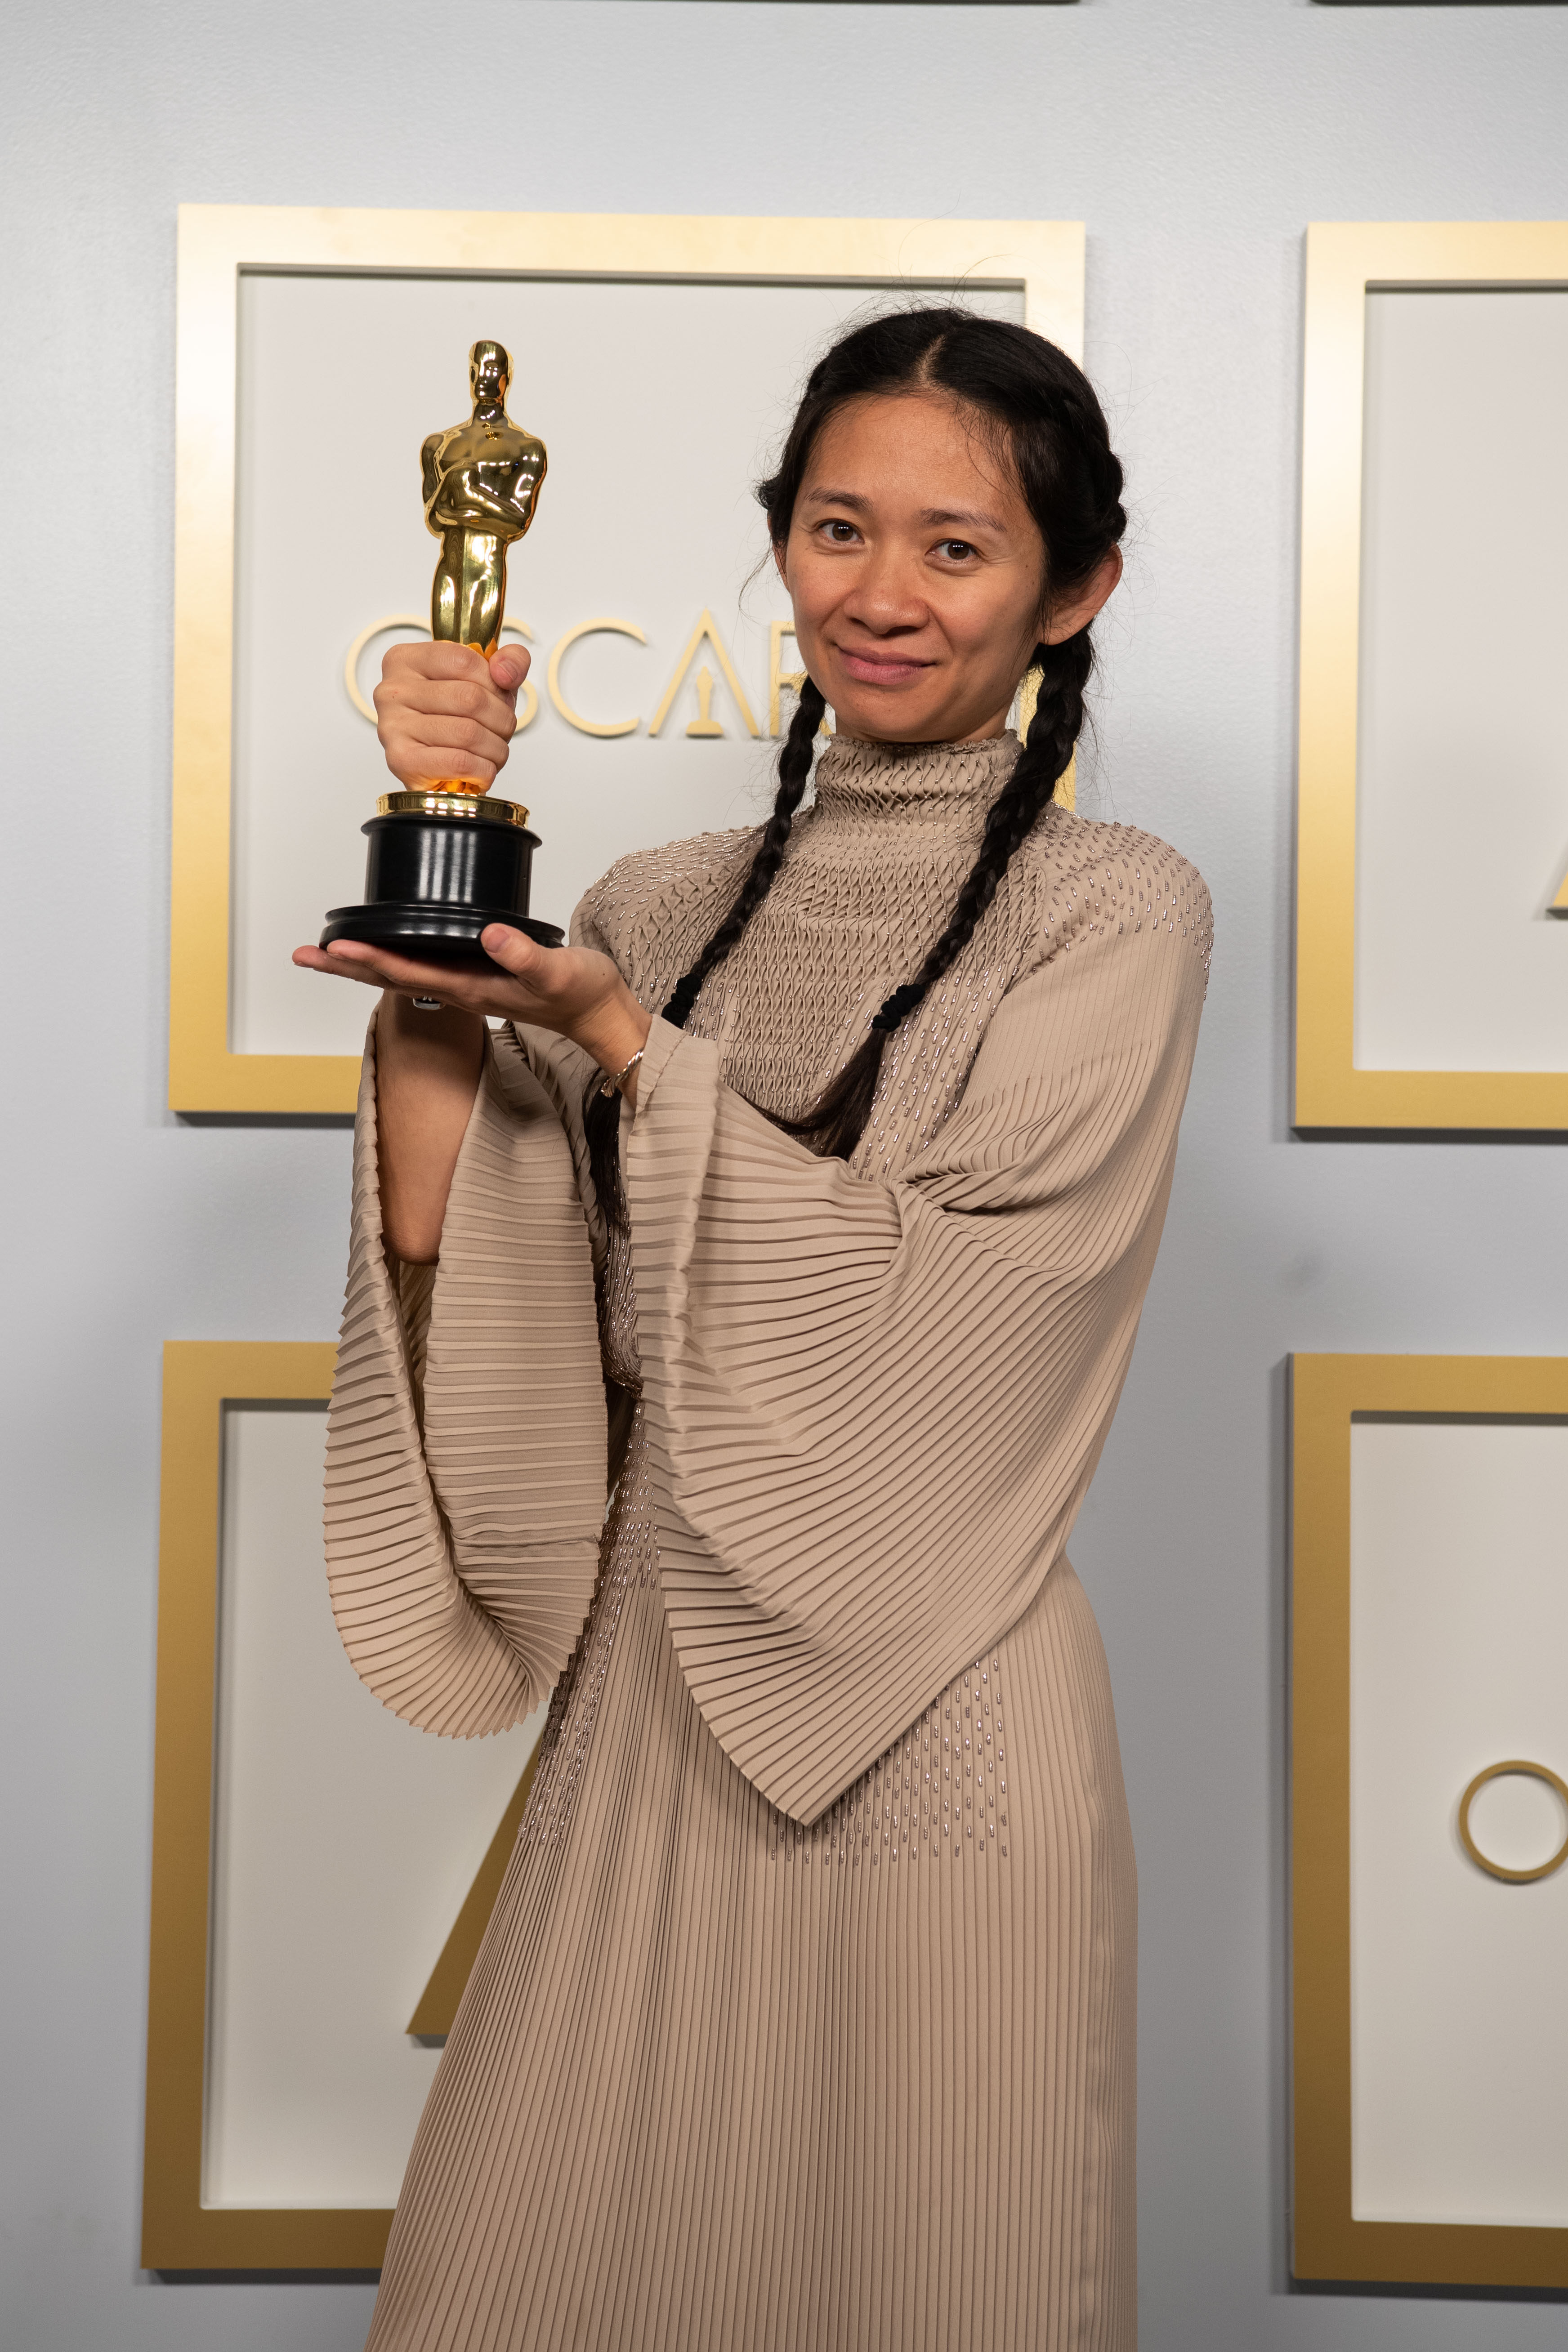 Chinese director and producer Chloe Zhao poses with one of her Oscars awards for best picture and director for Nomadland, at the press room of the 93rd Oscars Academy Awards at Union Station in Los Angeles on April 25, 2021. Photo: AMPAS/PA Media/DPA